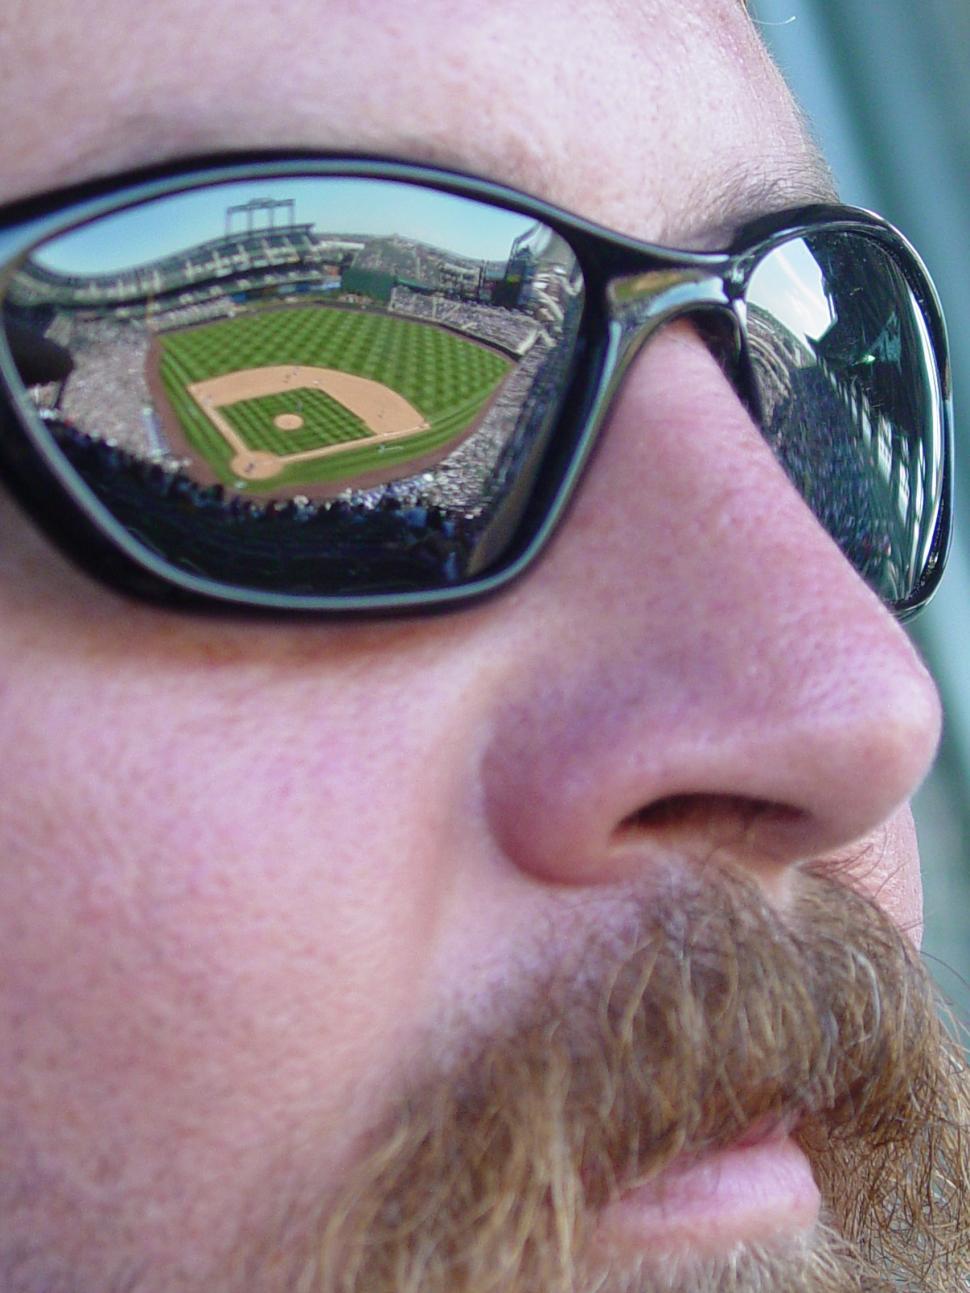 Free Image of Baseball Field Reflection in Sunglasses 